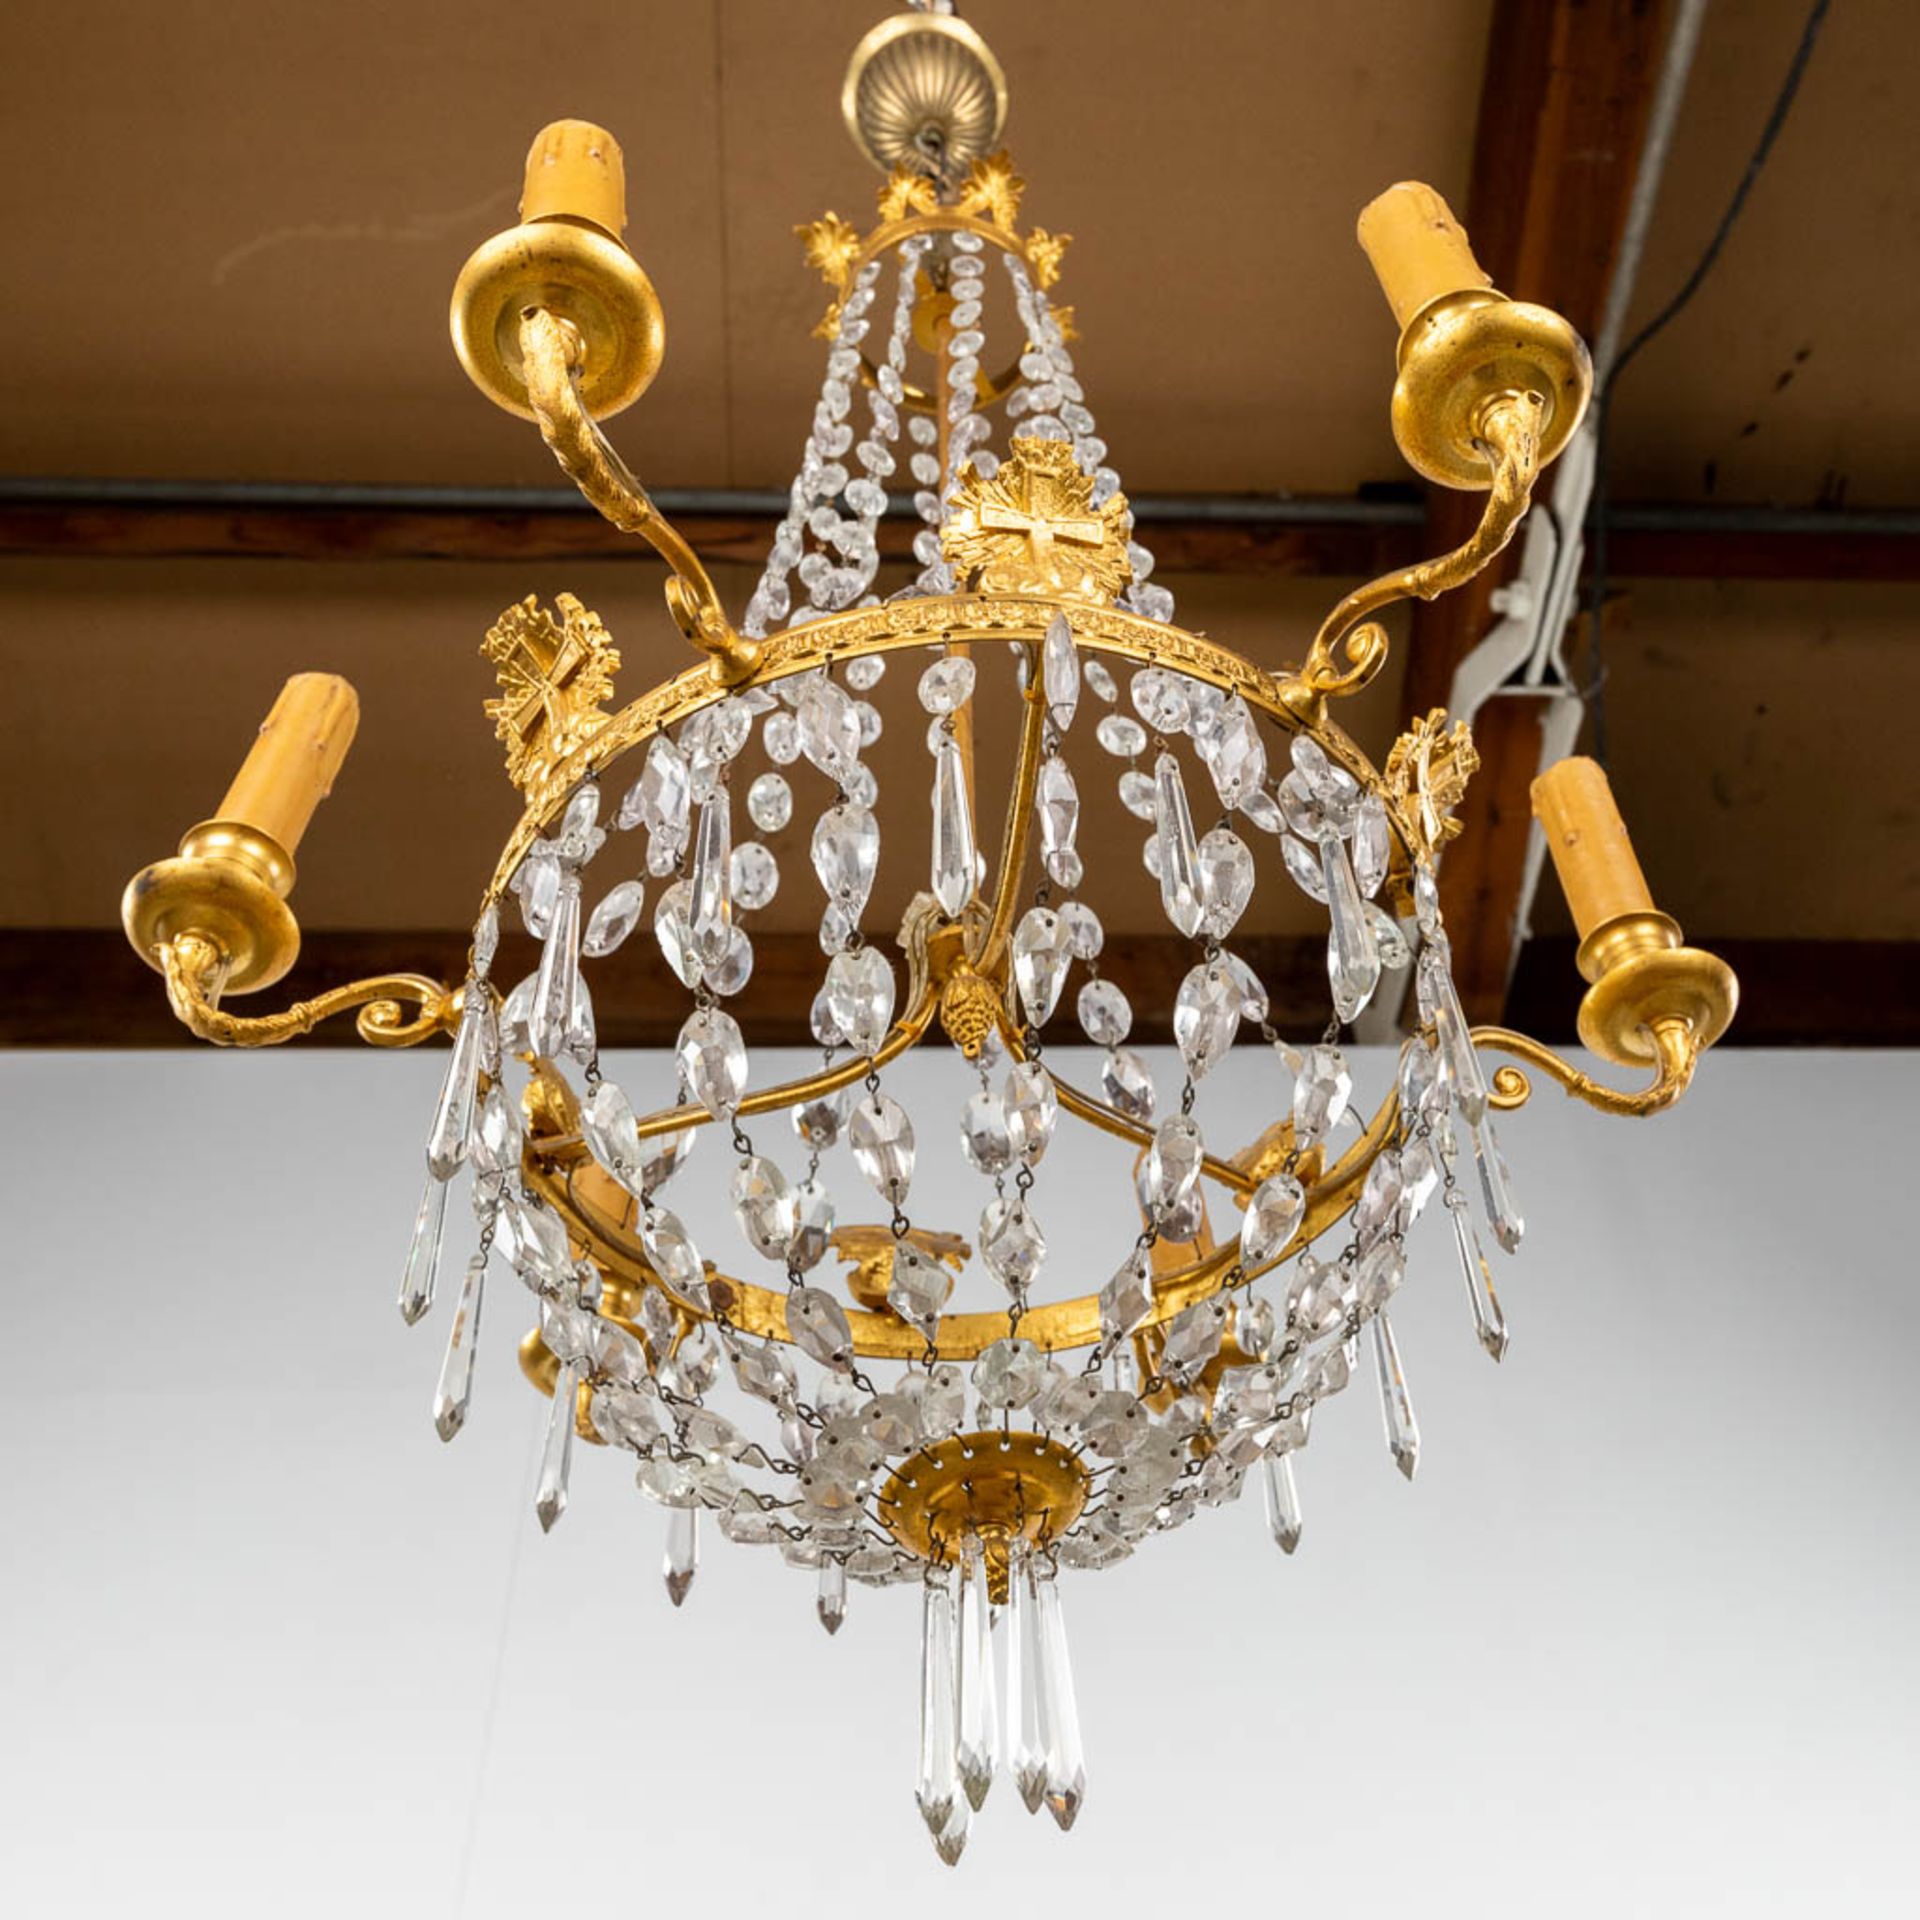 A chandelier 'Sac ˆ Perles', bronze and glass in empire style. 20th C. (H: 100 x D: 50 cm) - Bild 11 aus 11